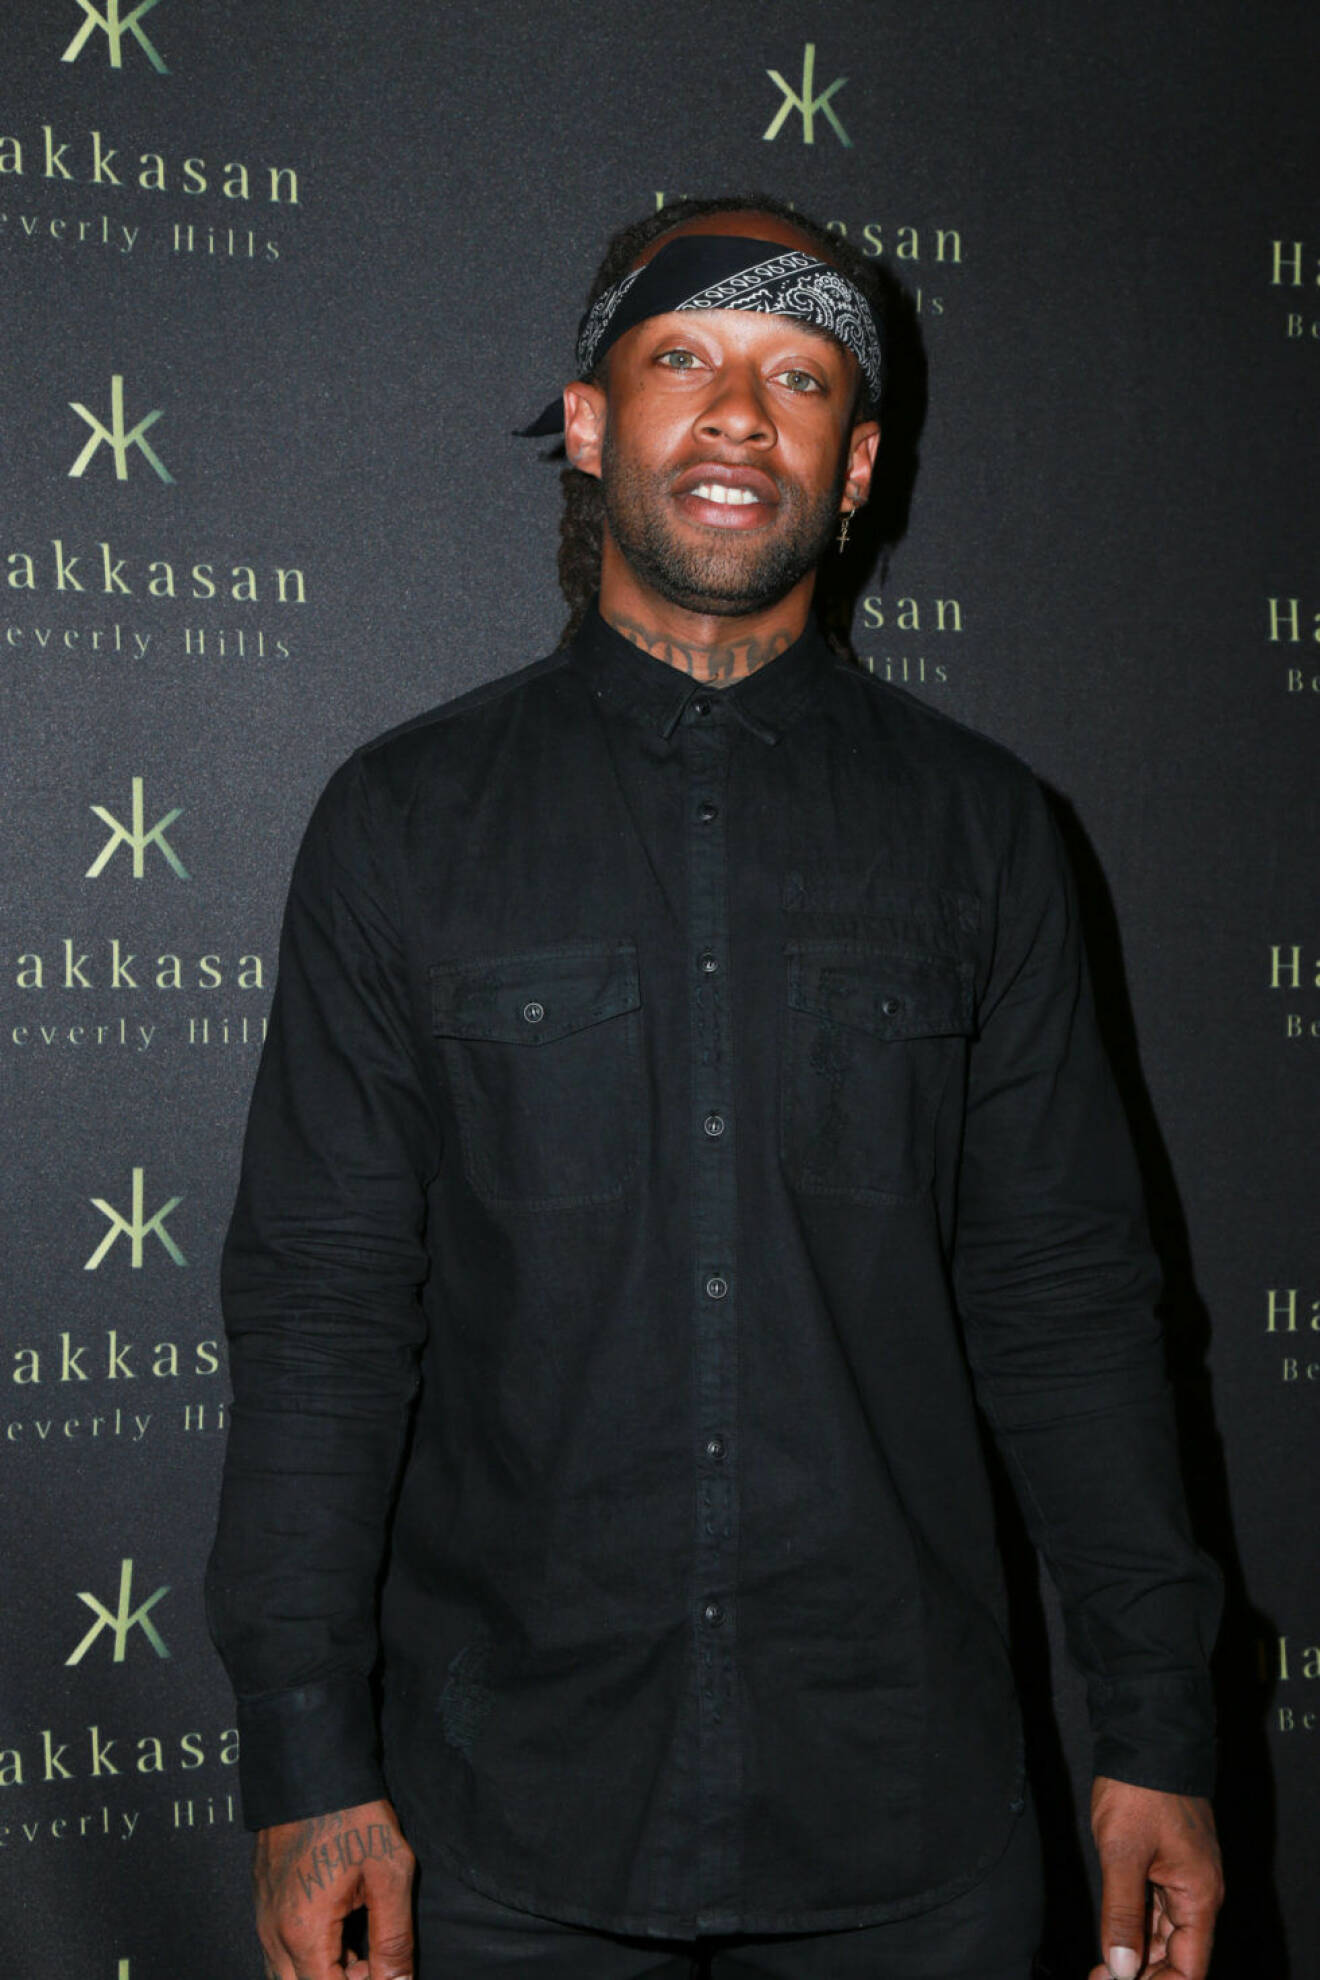 Celebrities attend the Flaunt Magazine Honors Norman Reedus Event at Hakkasan Restaurant in Beverly Hills, California. Pictured: Ty Dolla Sign Ref: SPL1006050 220415 Picture by: @Splash / Splash News Splash News and Pictures Los Angeles:310-821-2666 New York: 212-619-2666 London: 870-934-2666 photodesk@splashnews.com 